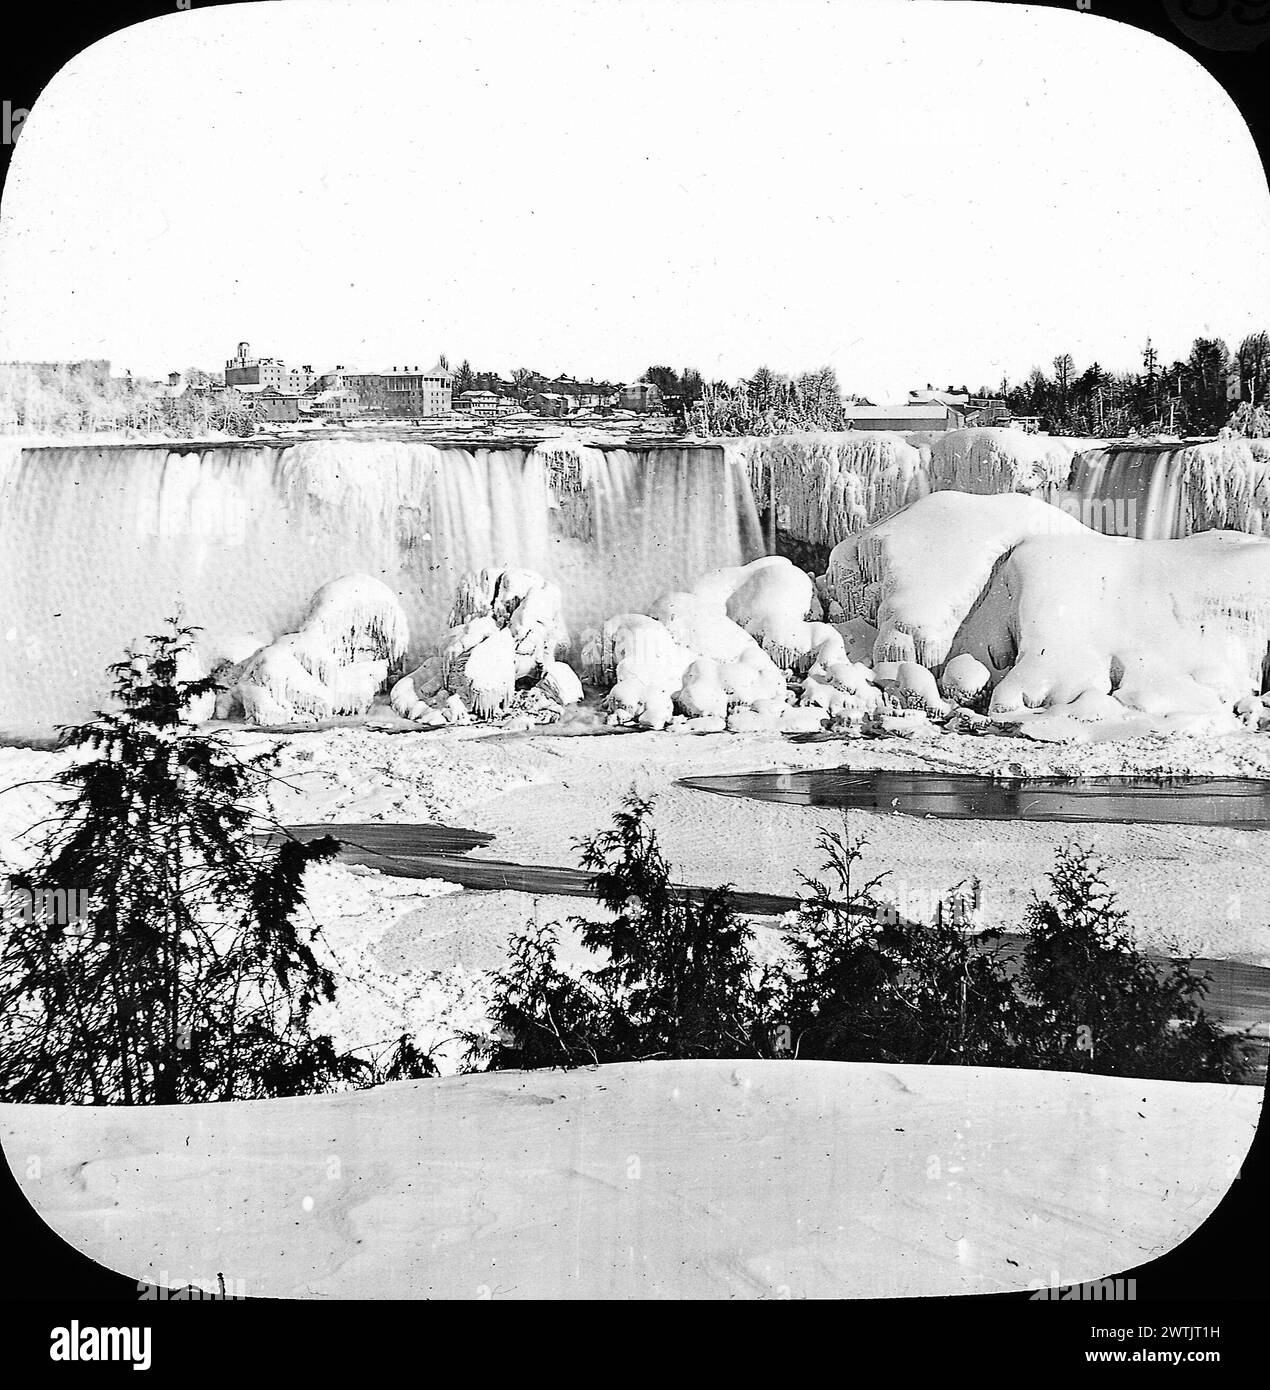 Transparency - American Falls from Canadian side, Niagara Falls, New York, about 1895 Stock Photo